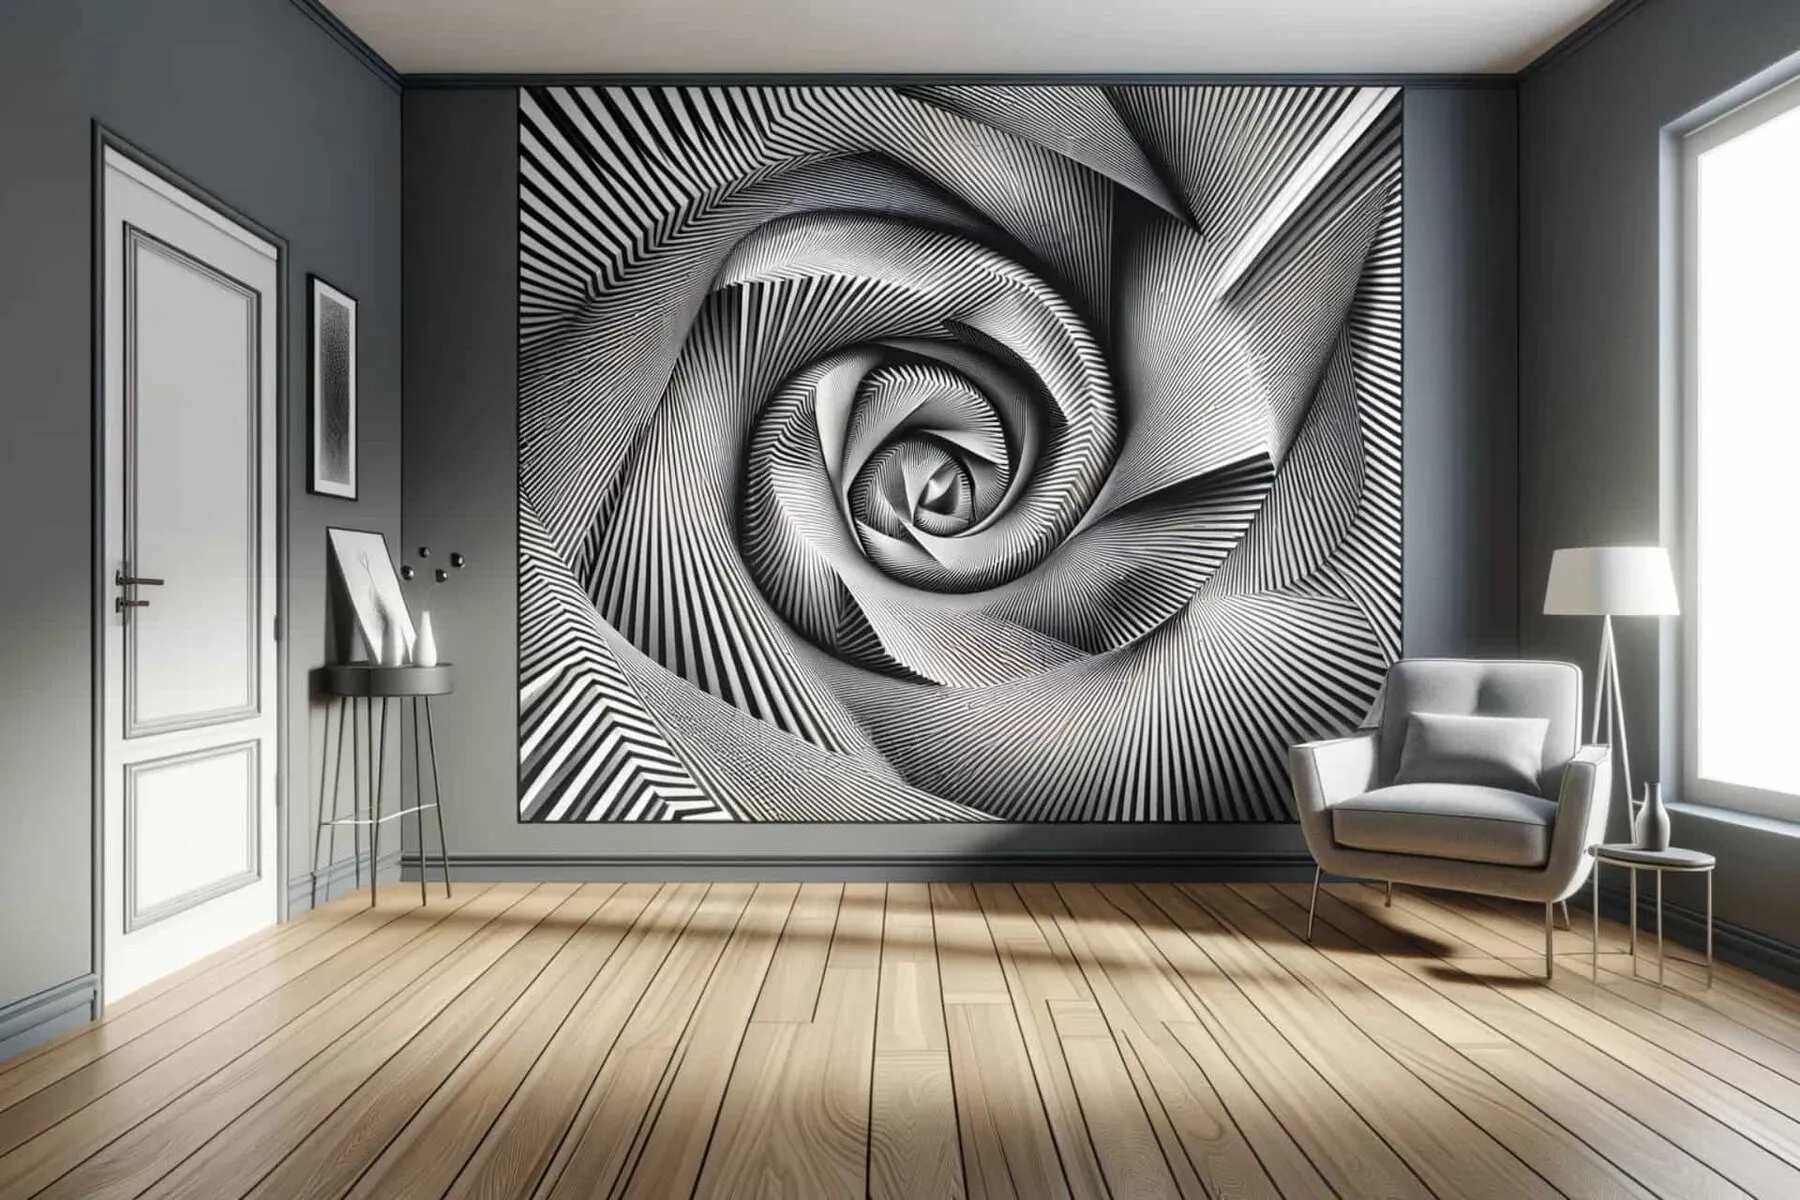 room with a wall that features a dynamic, optical illusion pattern, creating a sense of movement and depth, reminiscent of the work of Peter Kogler